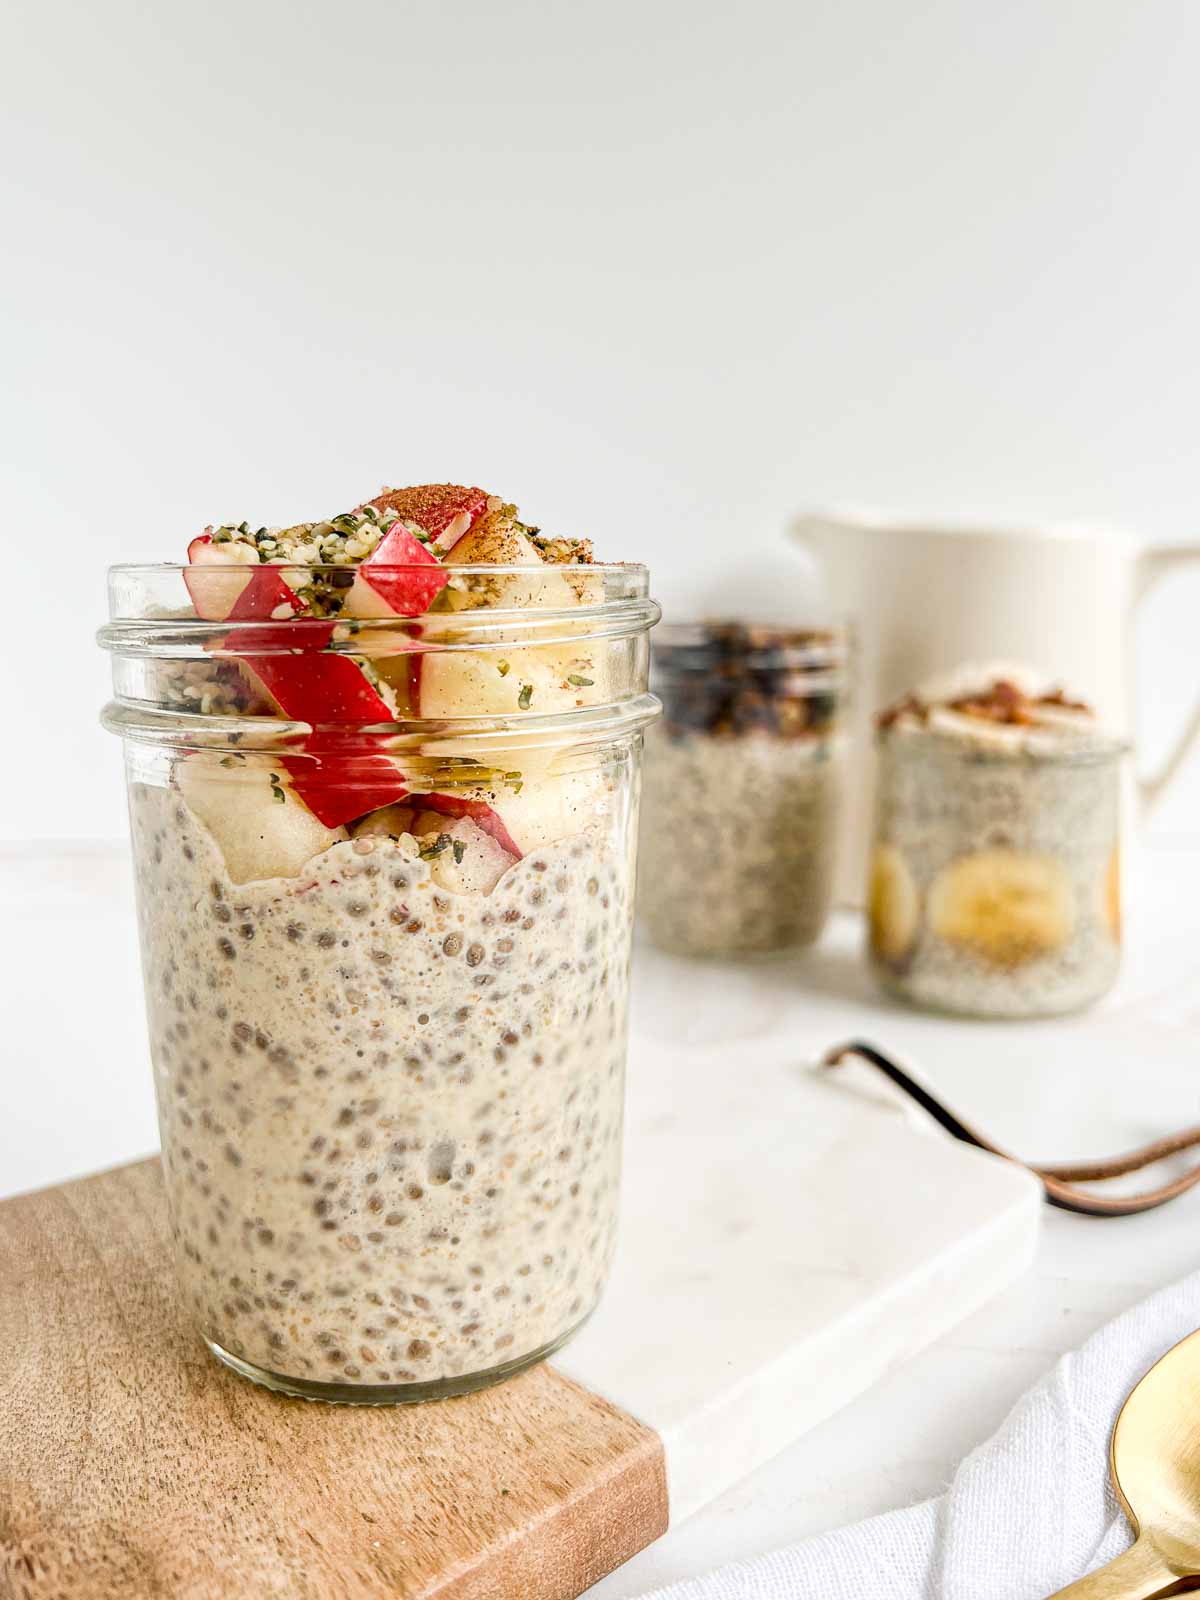 Chia pudding topped with apples, hemp hearts, and cinnamon on a serving board.